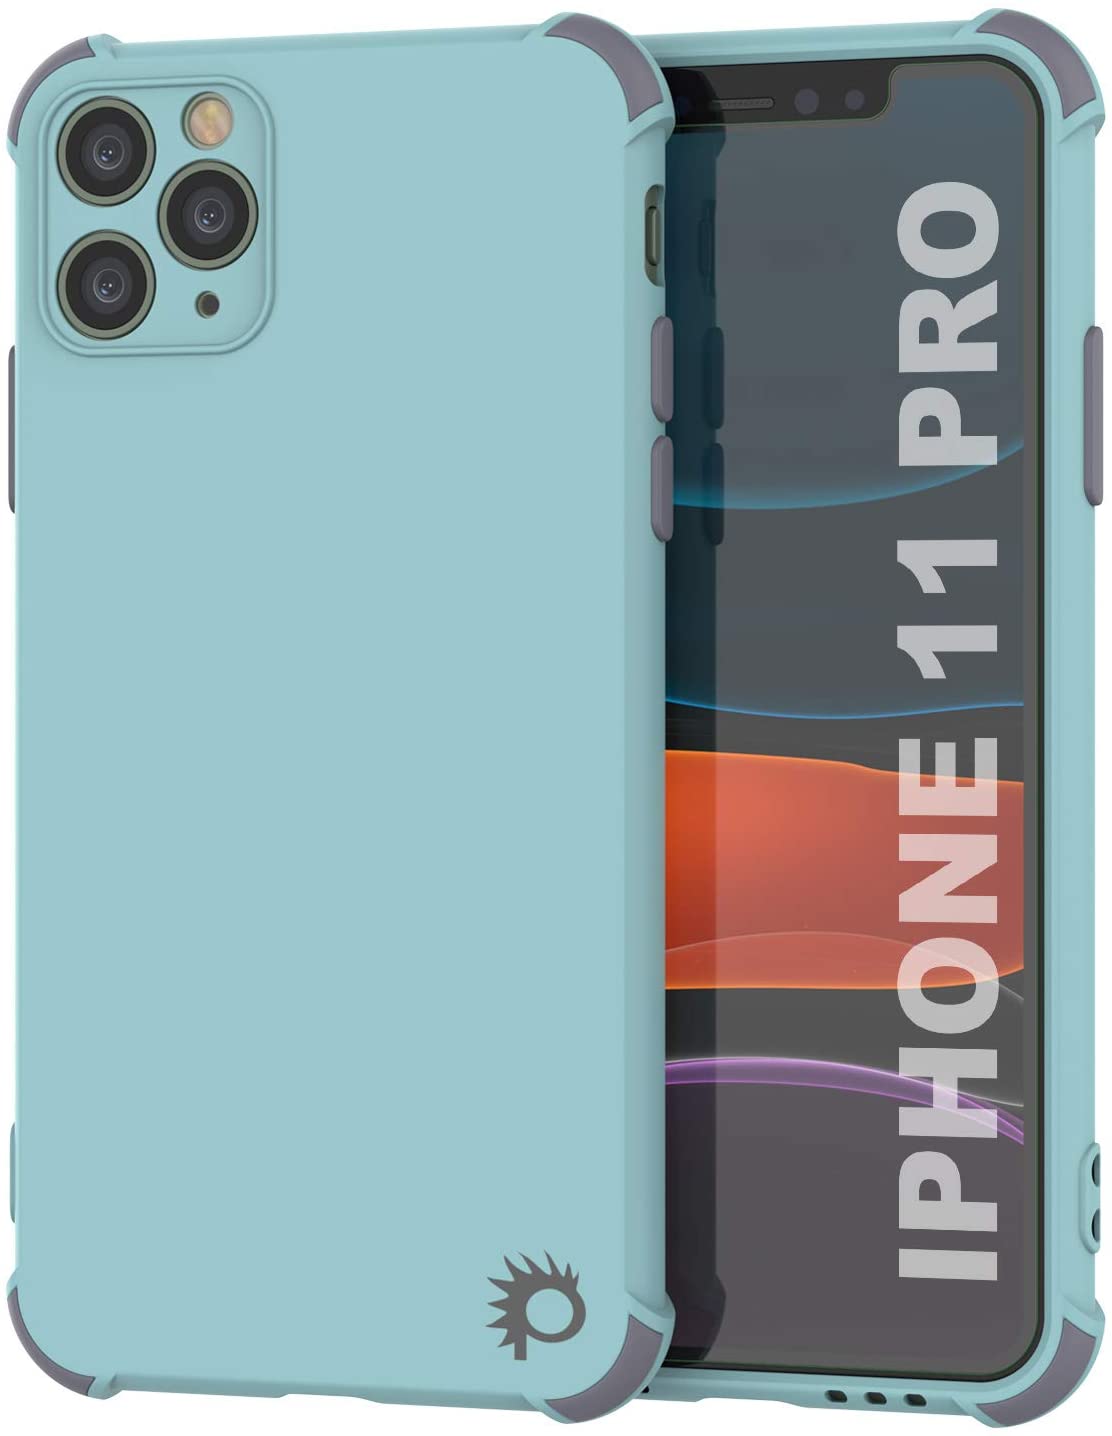 Punkcase Protective & Lightweight TPU Case [Sunshine Series] for iPhone 11 Pro [Teal] (Color in image: Teal)